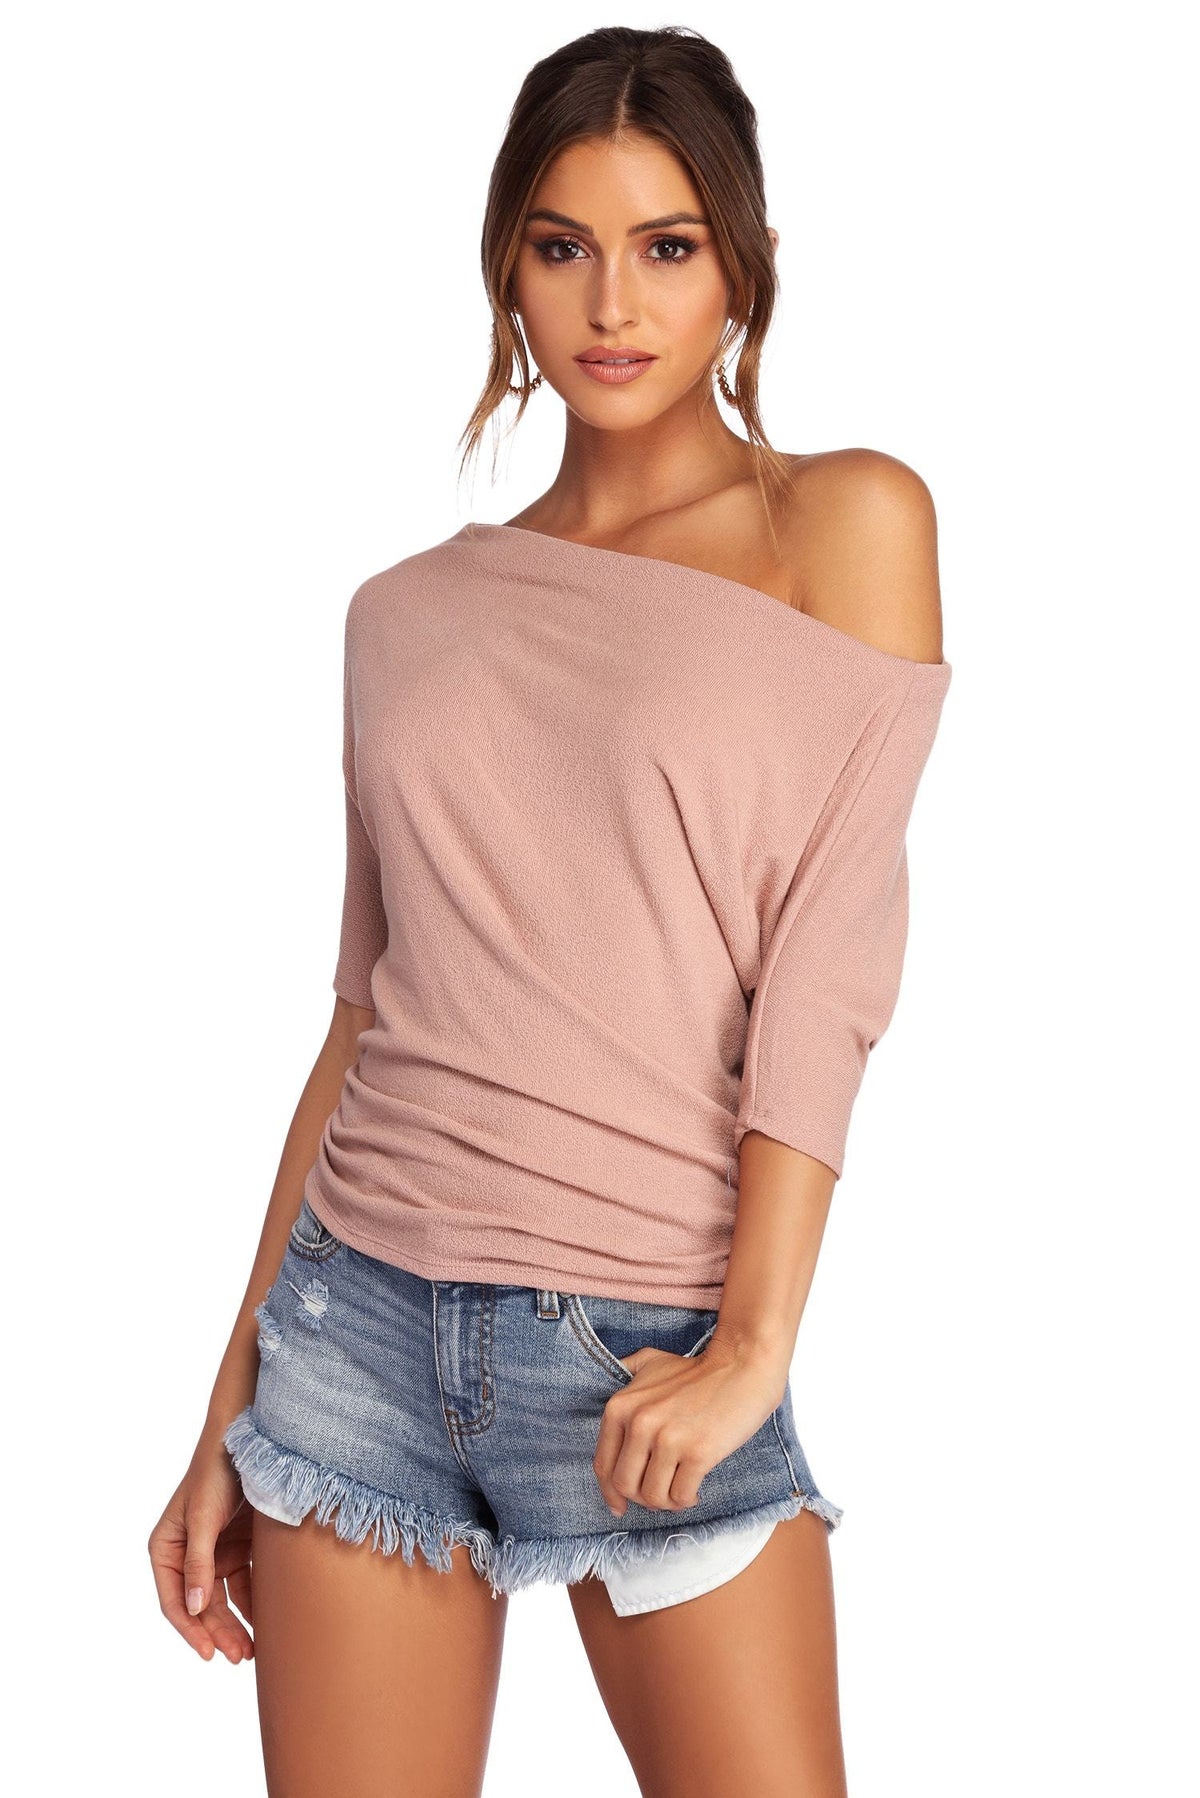 On Deck Ruched Knit Top - Lady Occasions